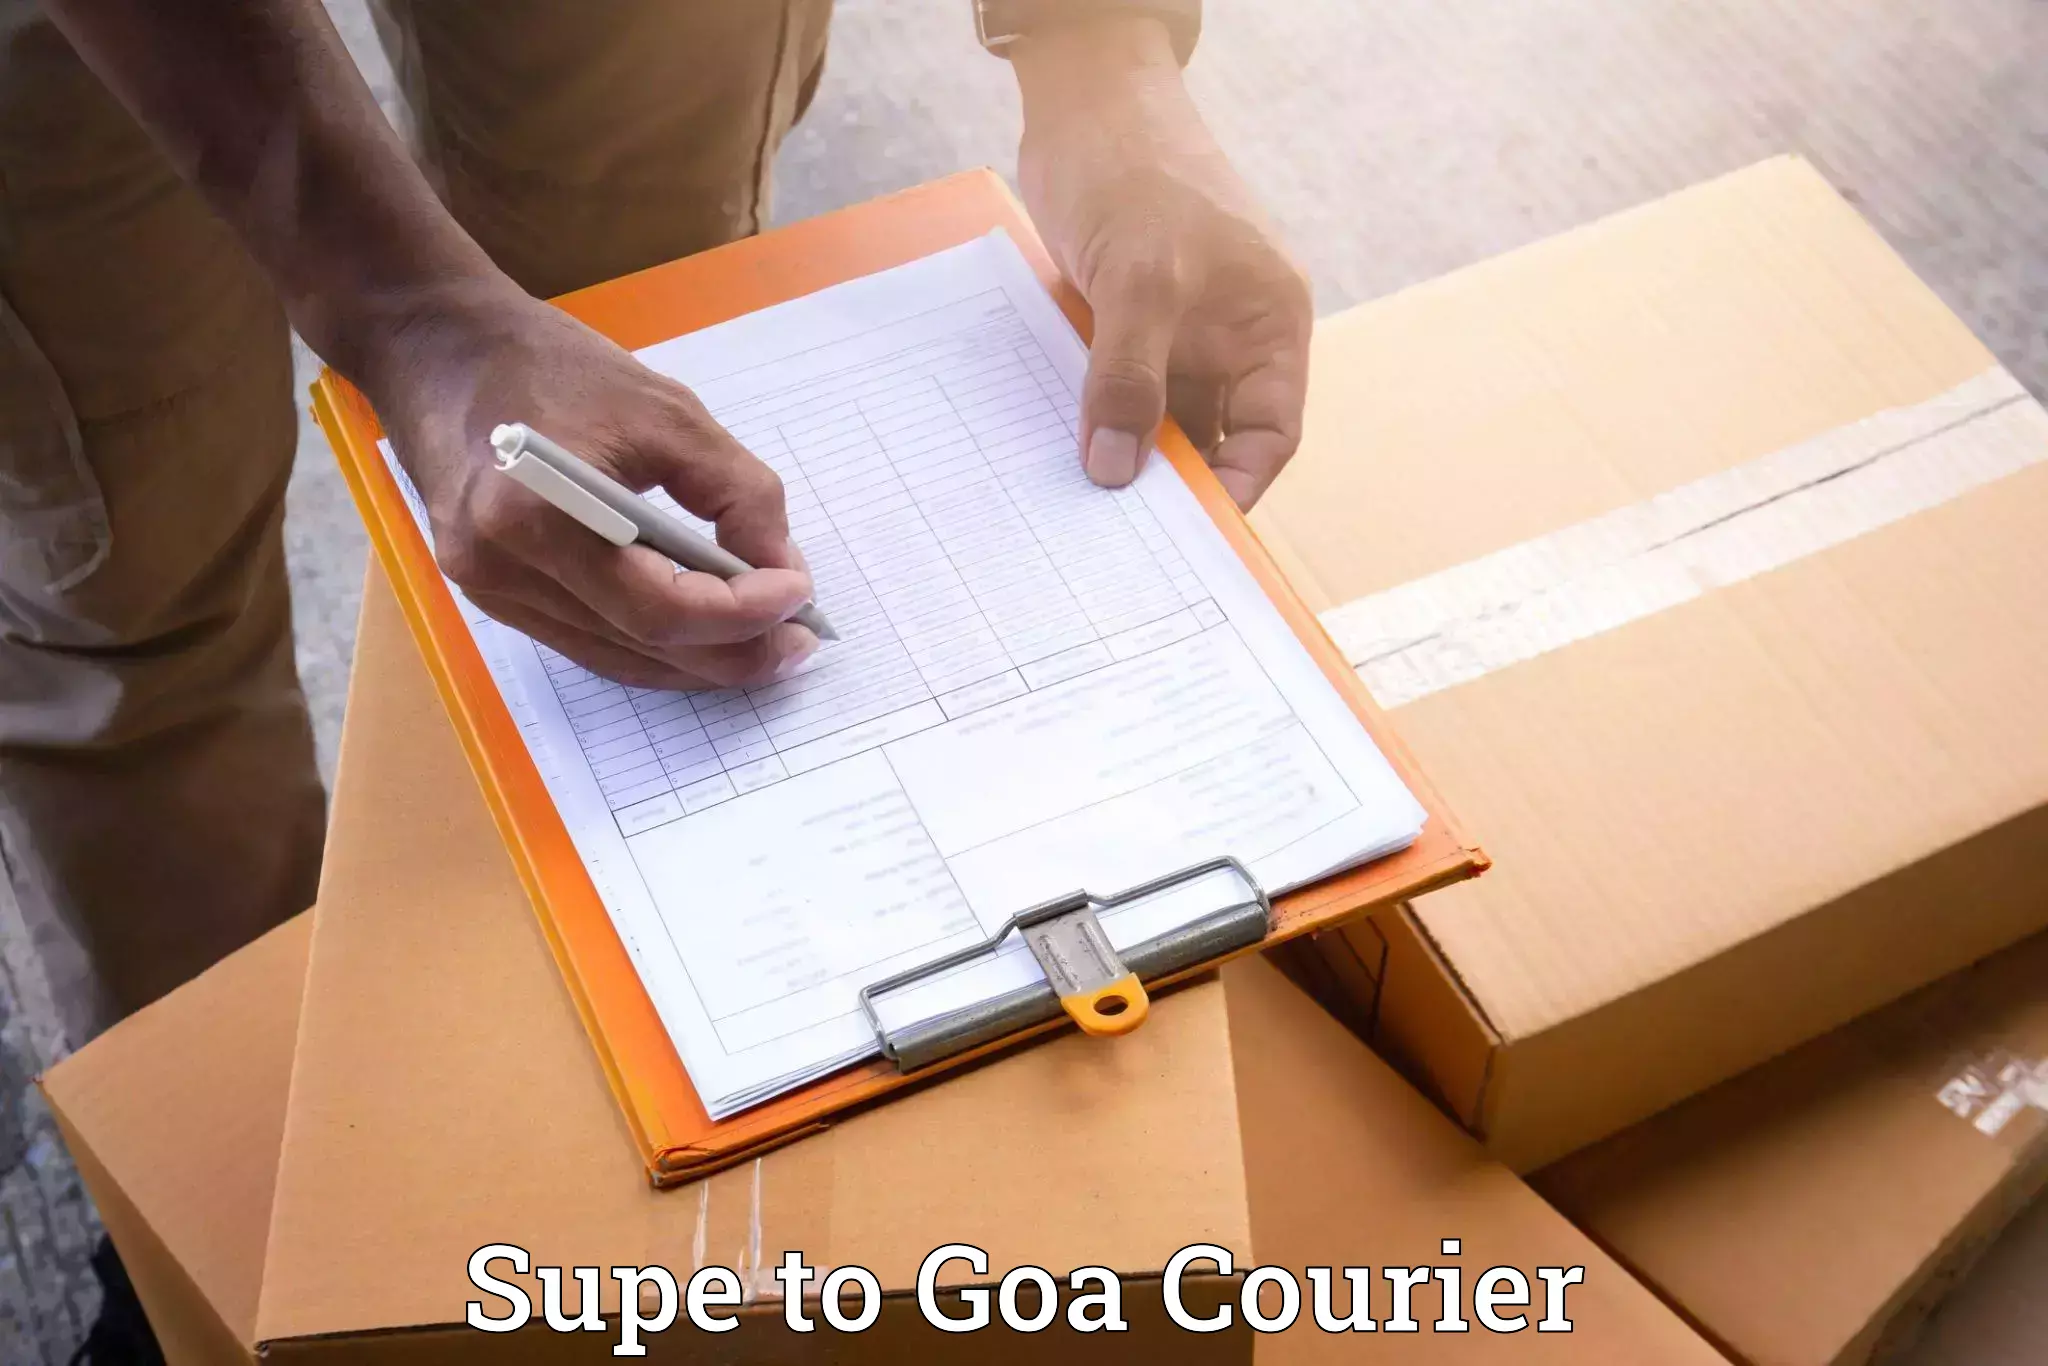 Trusted furniture transport Supe to Goa